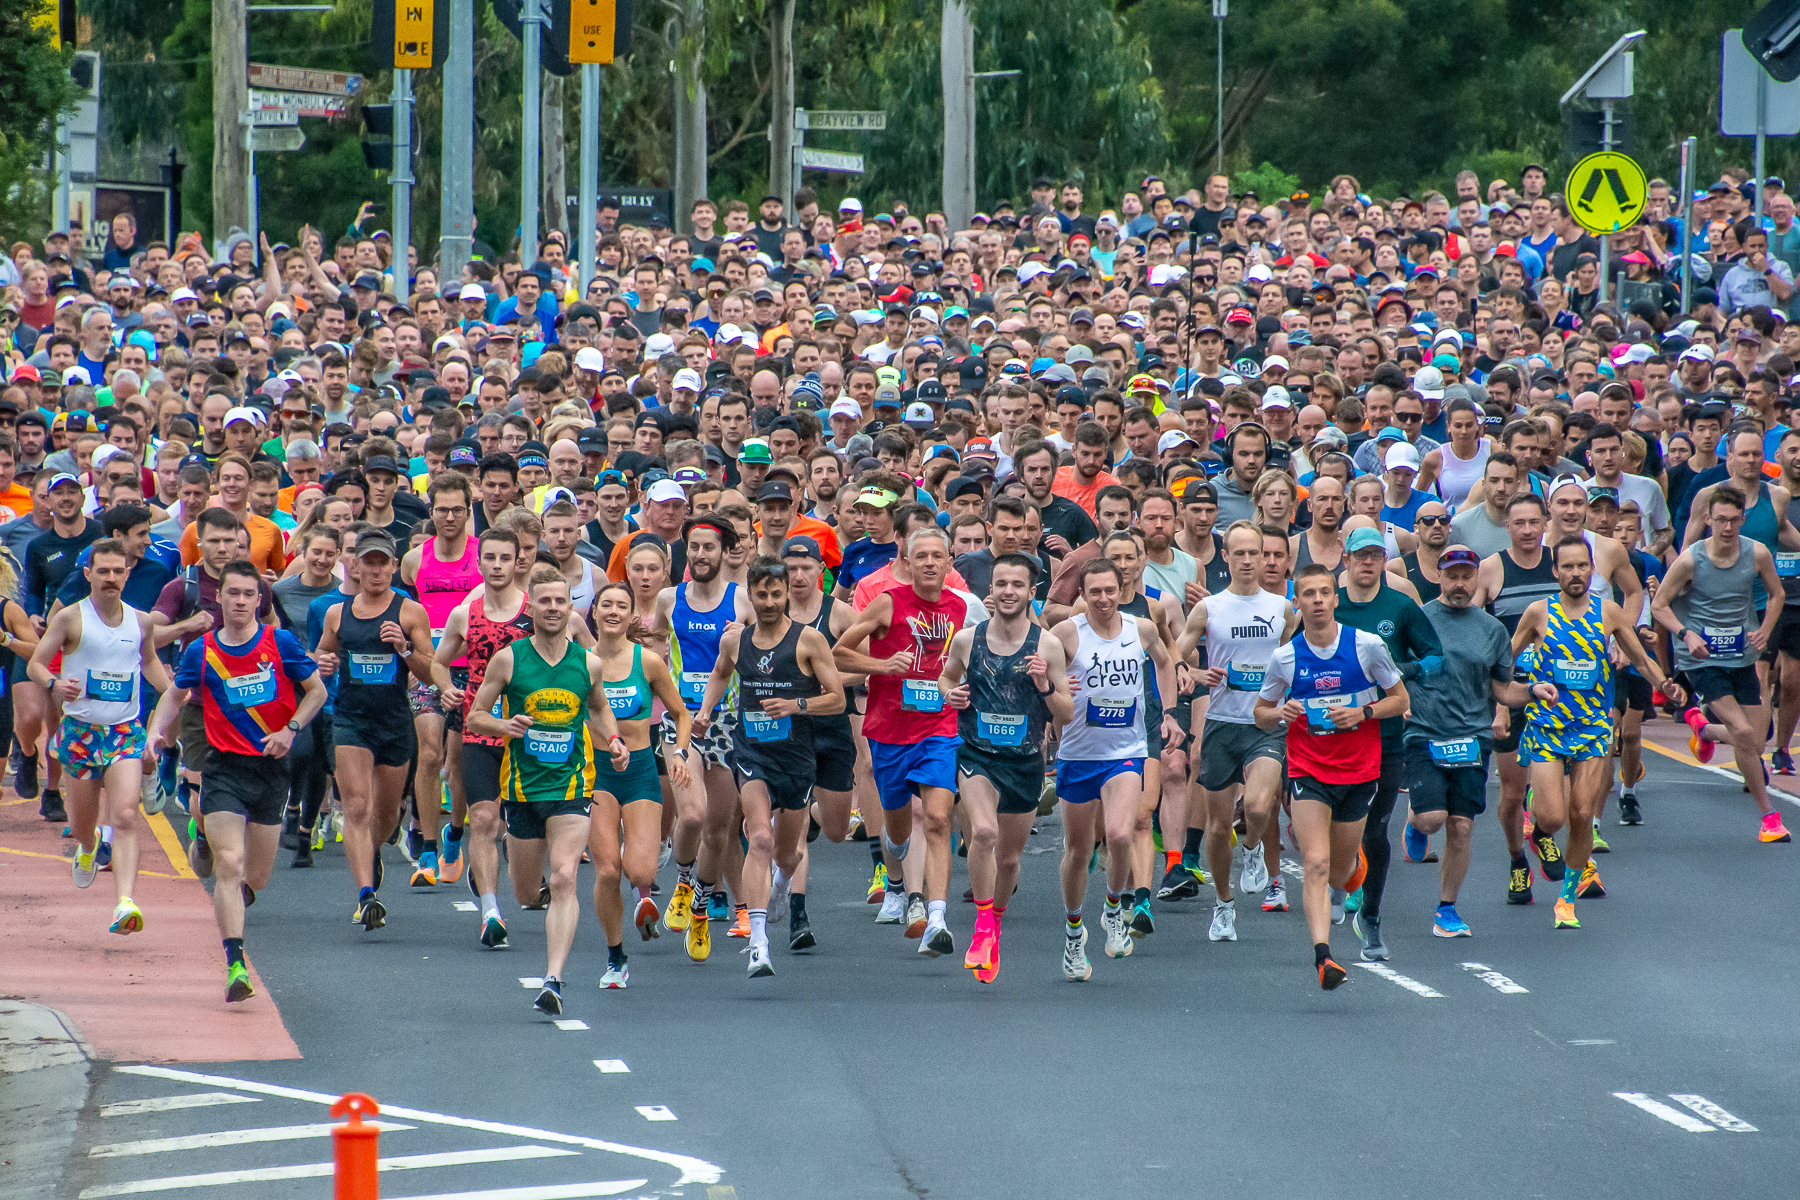 A field of runners on a road.